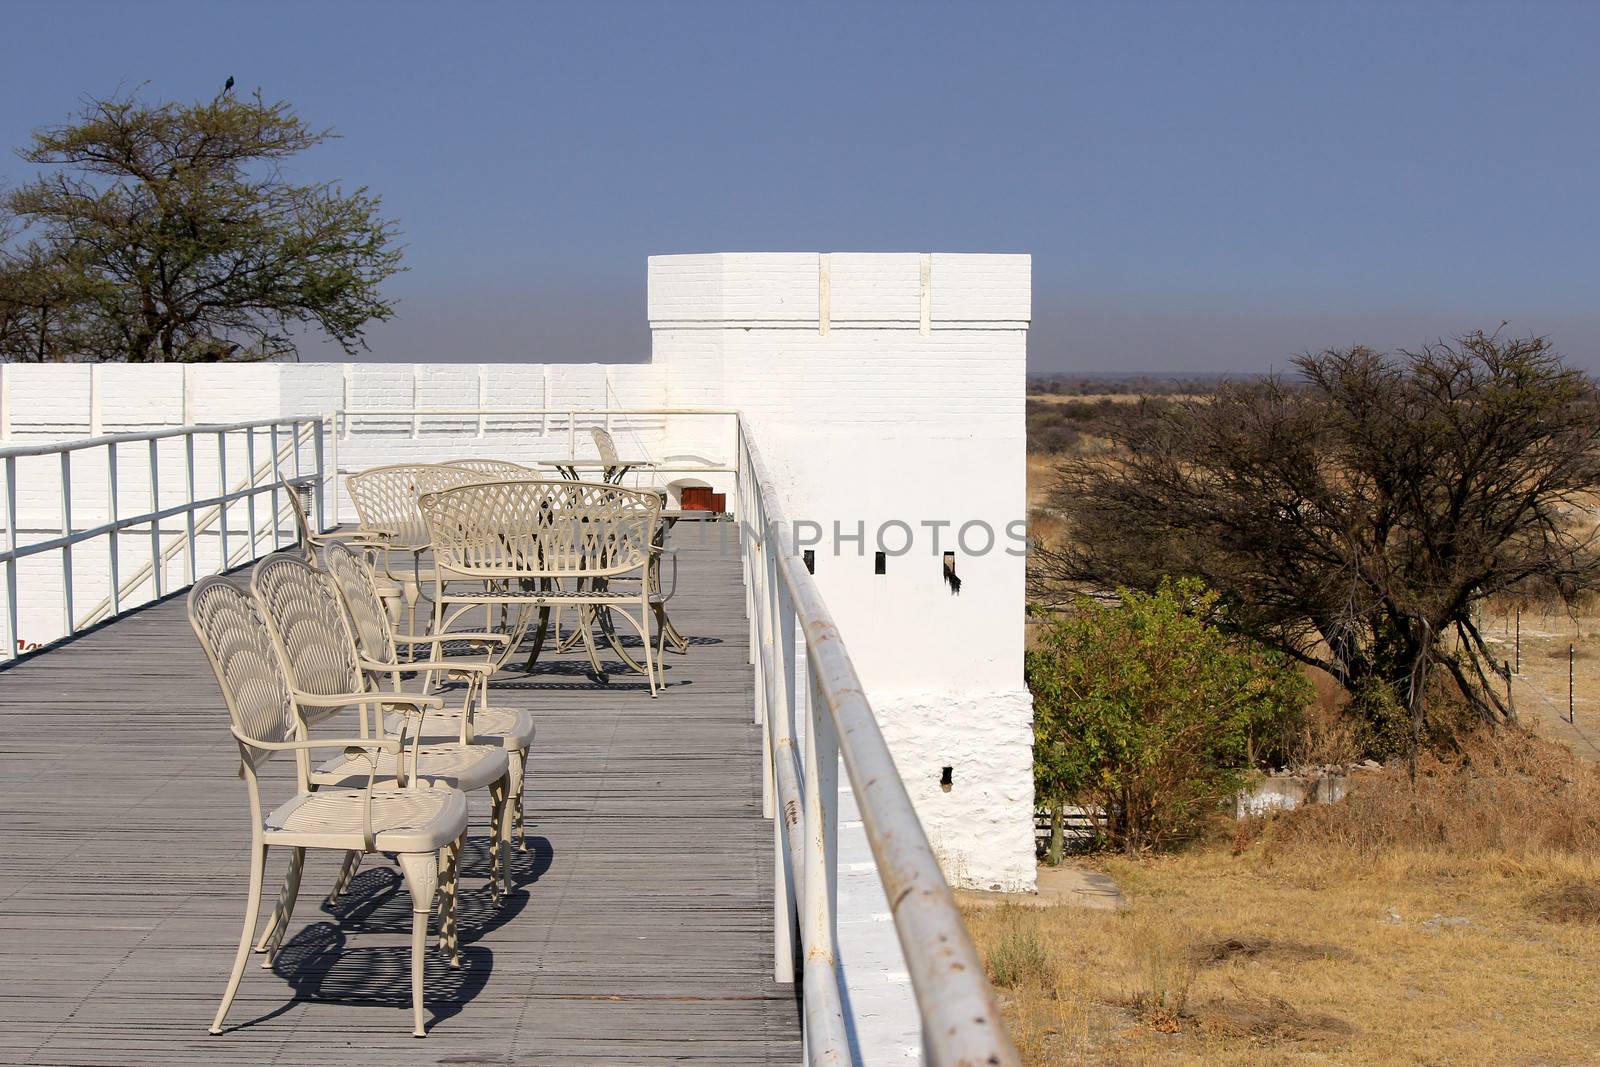 Namutoni Fort, entrance to Etosha National Park, Namibia. (a fort that was originally a German police post and later as a place to hold English prisoners in World War I)